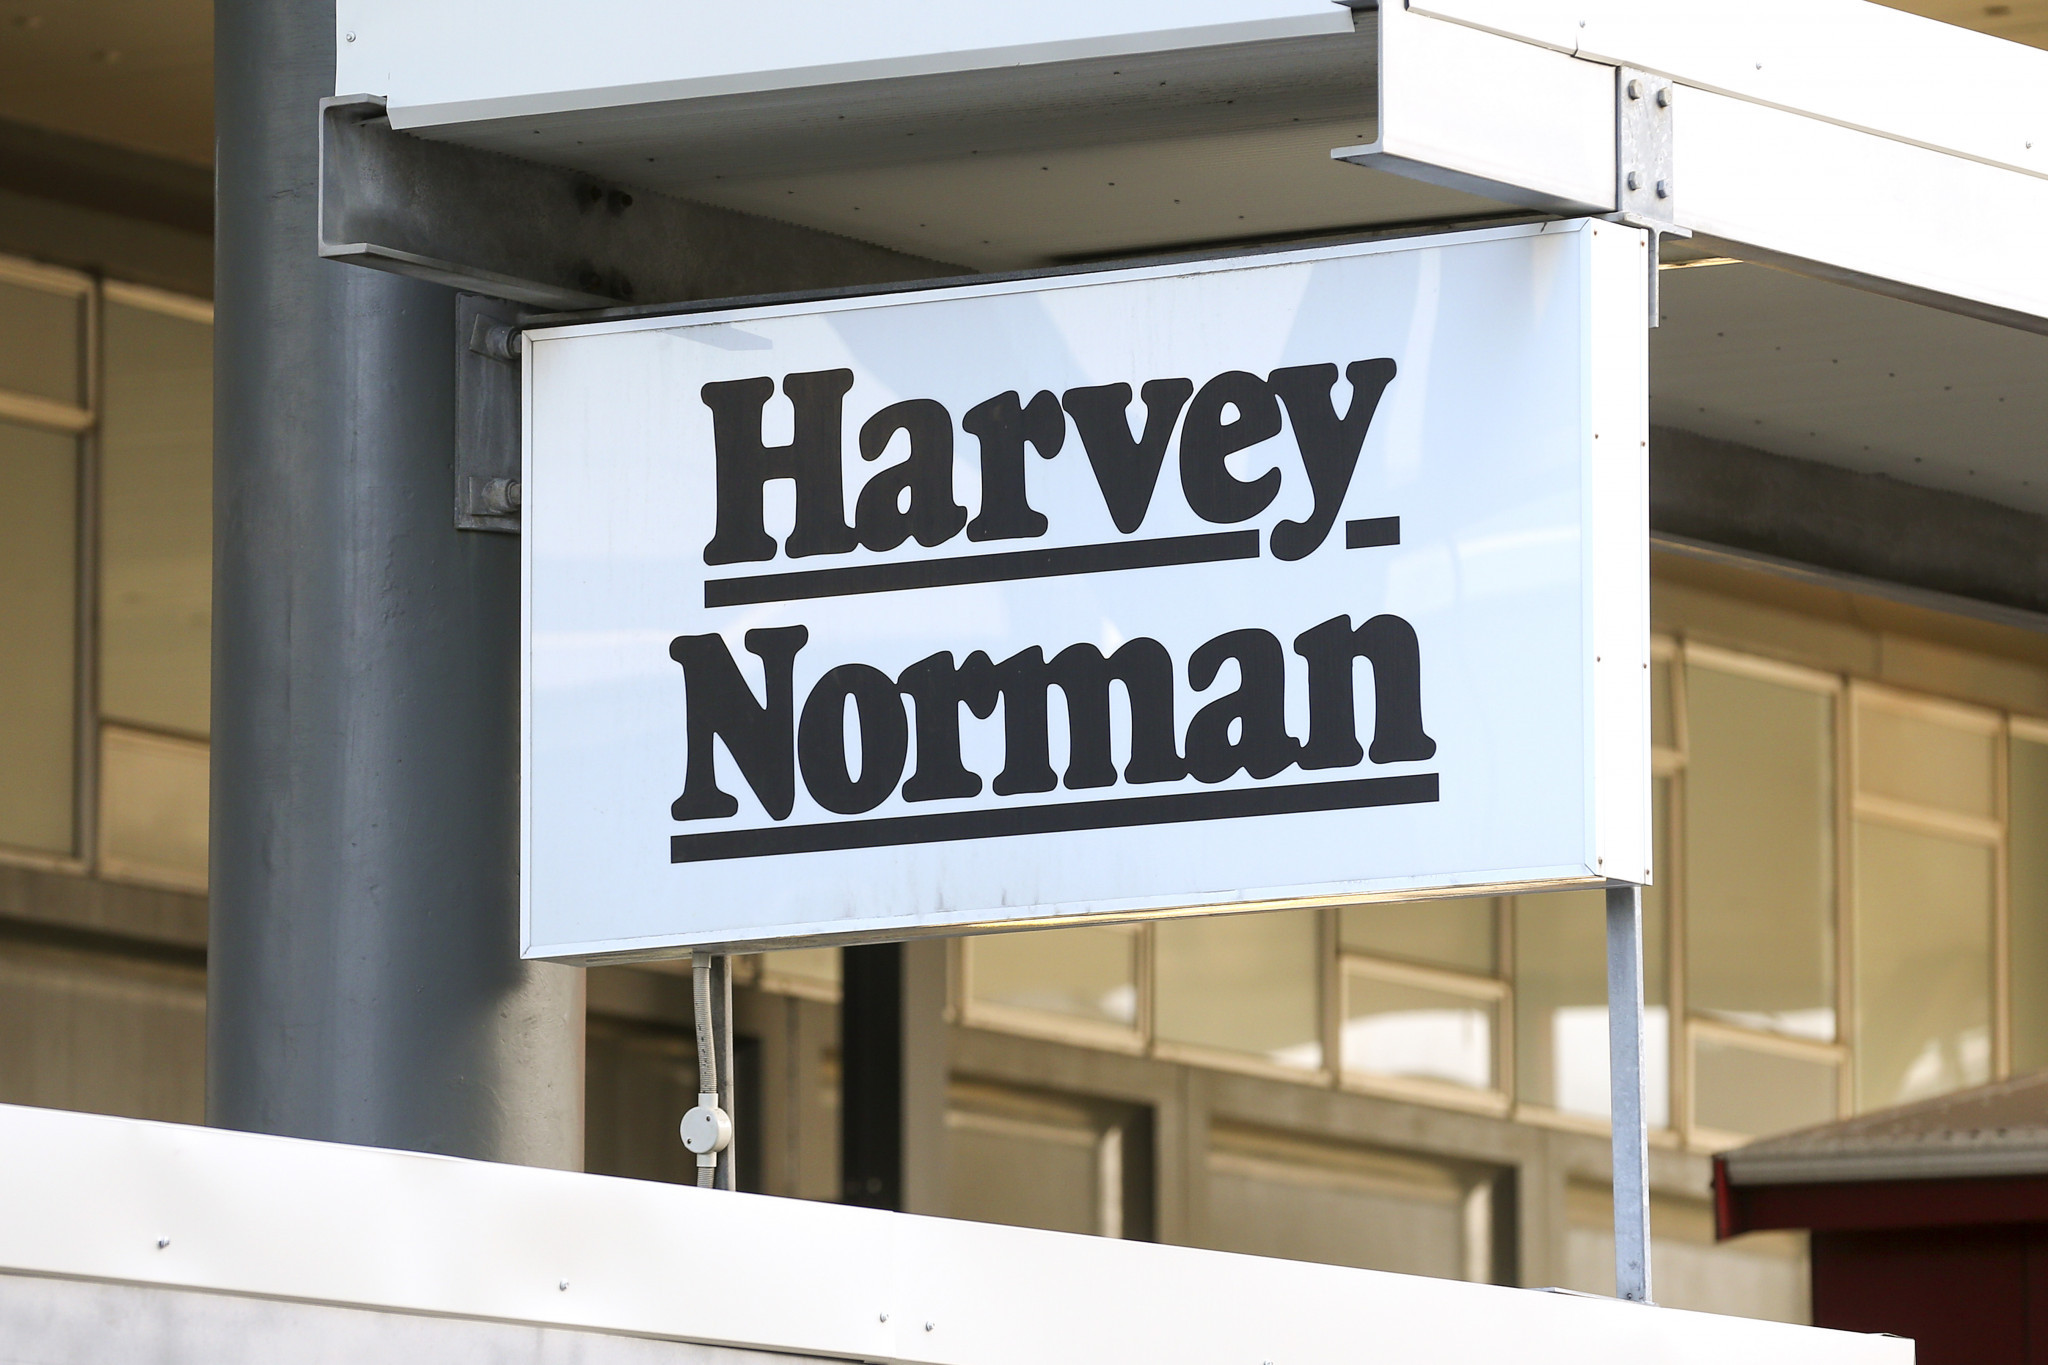 Harvey Norman is set to be an official partner of Australia's Birmingham 2022 team ©Getty Images